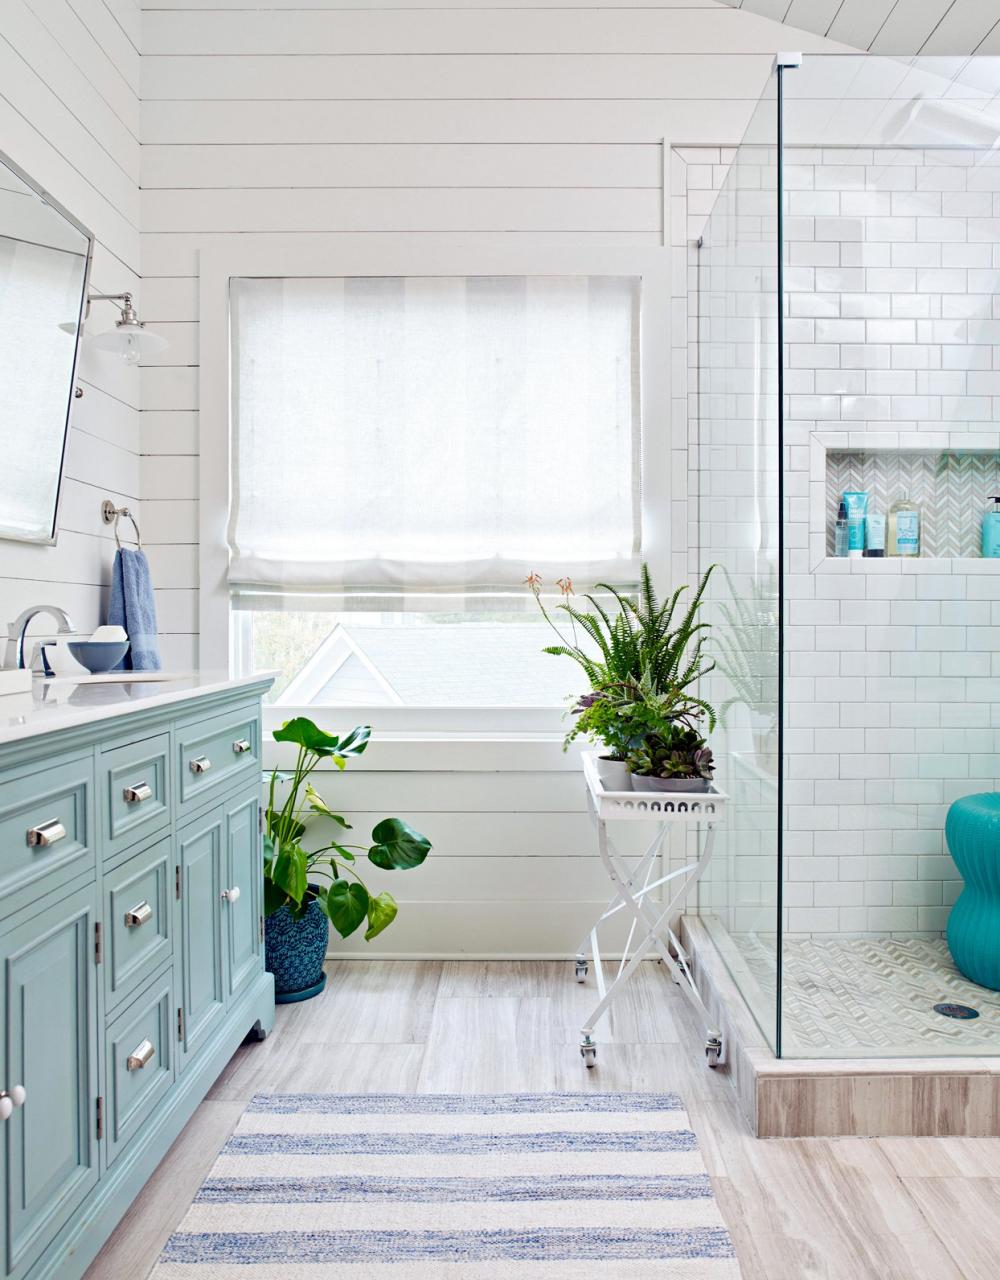 2021 Bathroom Design Trends That Will Be Huge Next Year Decor Report